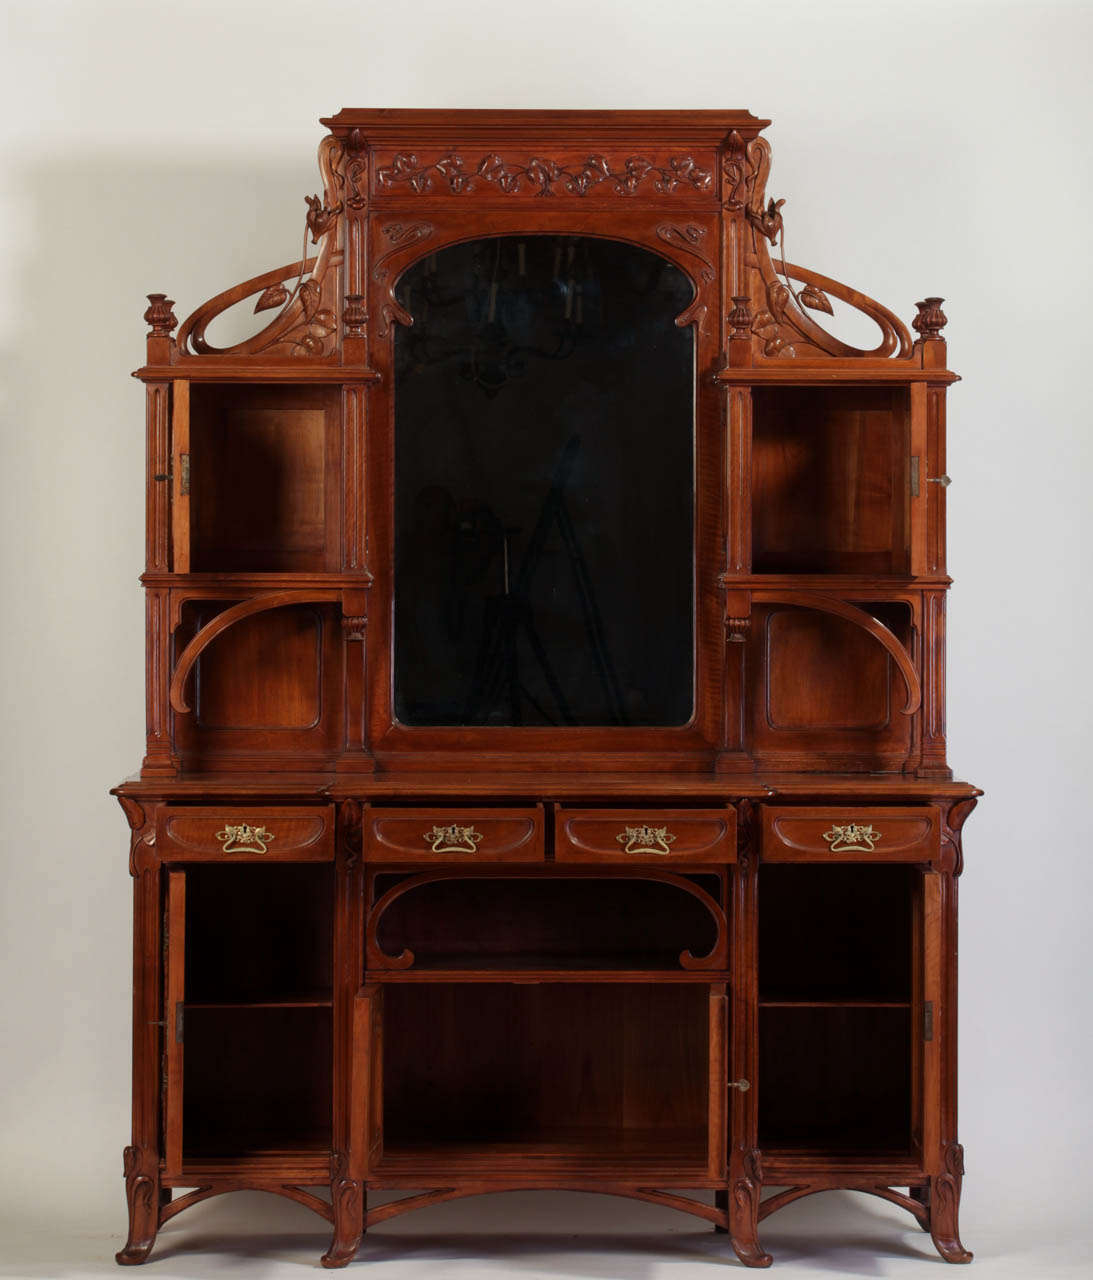 Art Nouveau Liberty Italian Carved and Gilt-Metal Mounted Sideboard Cabinet